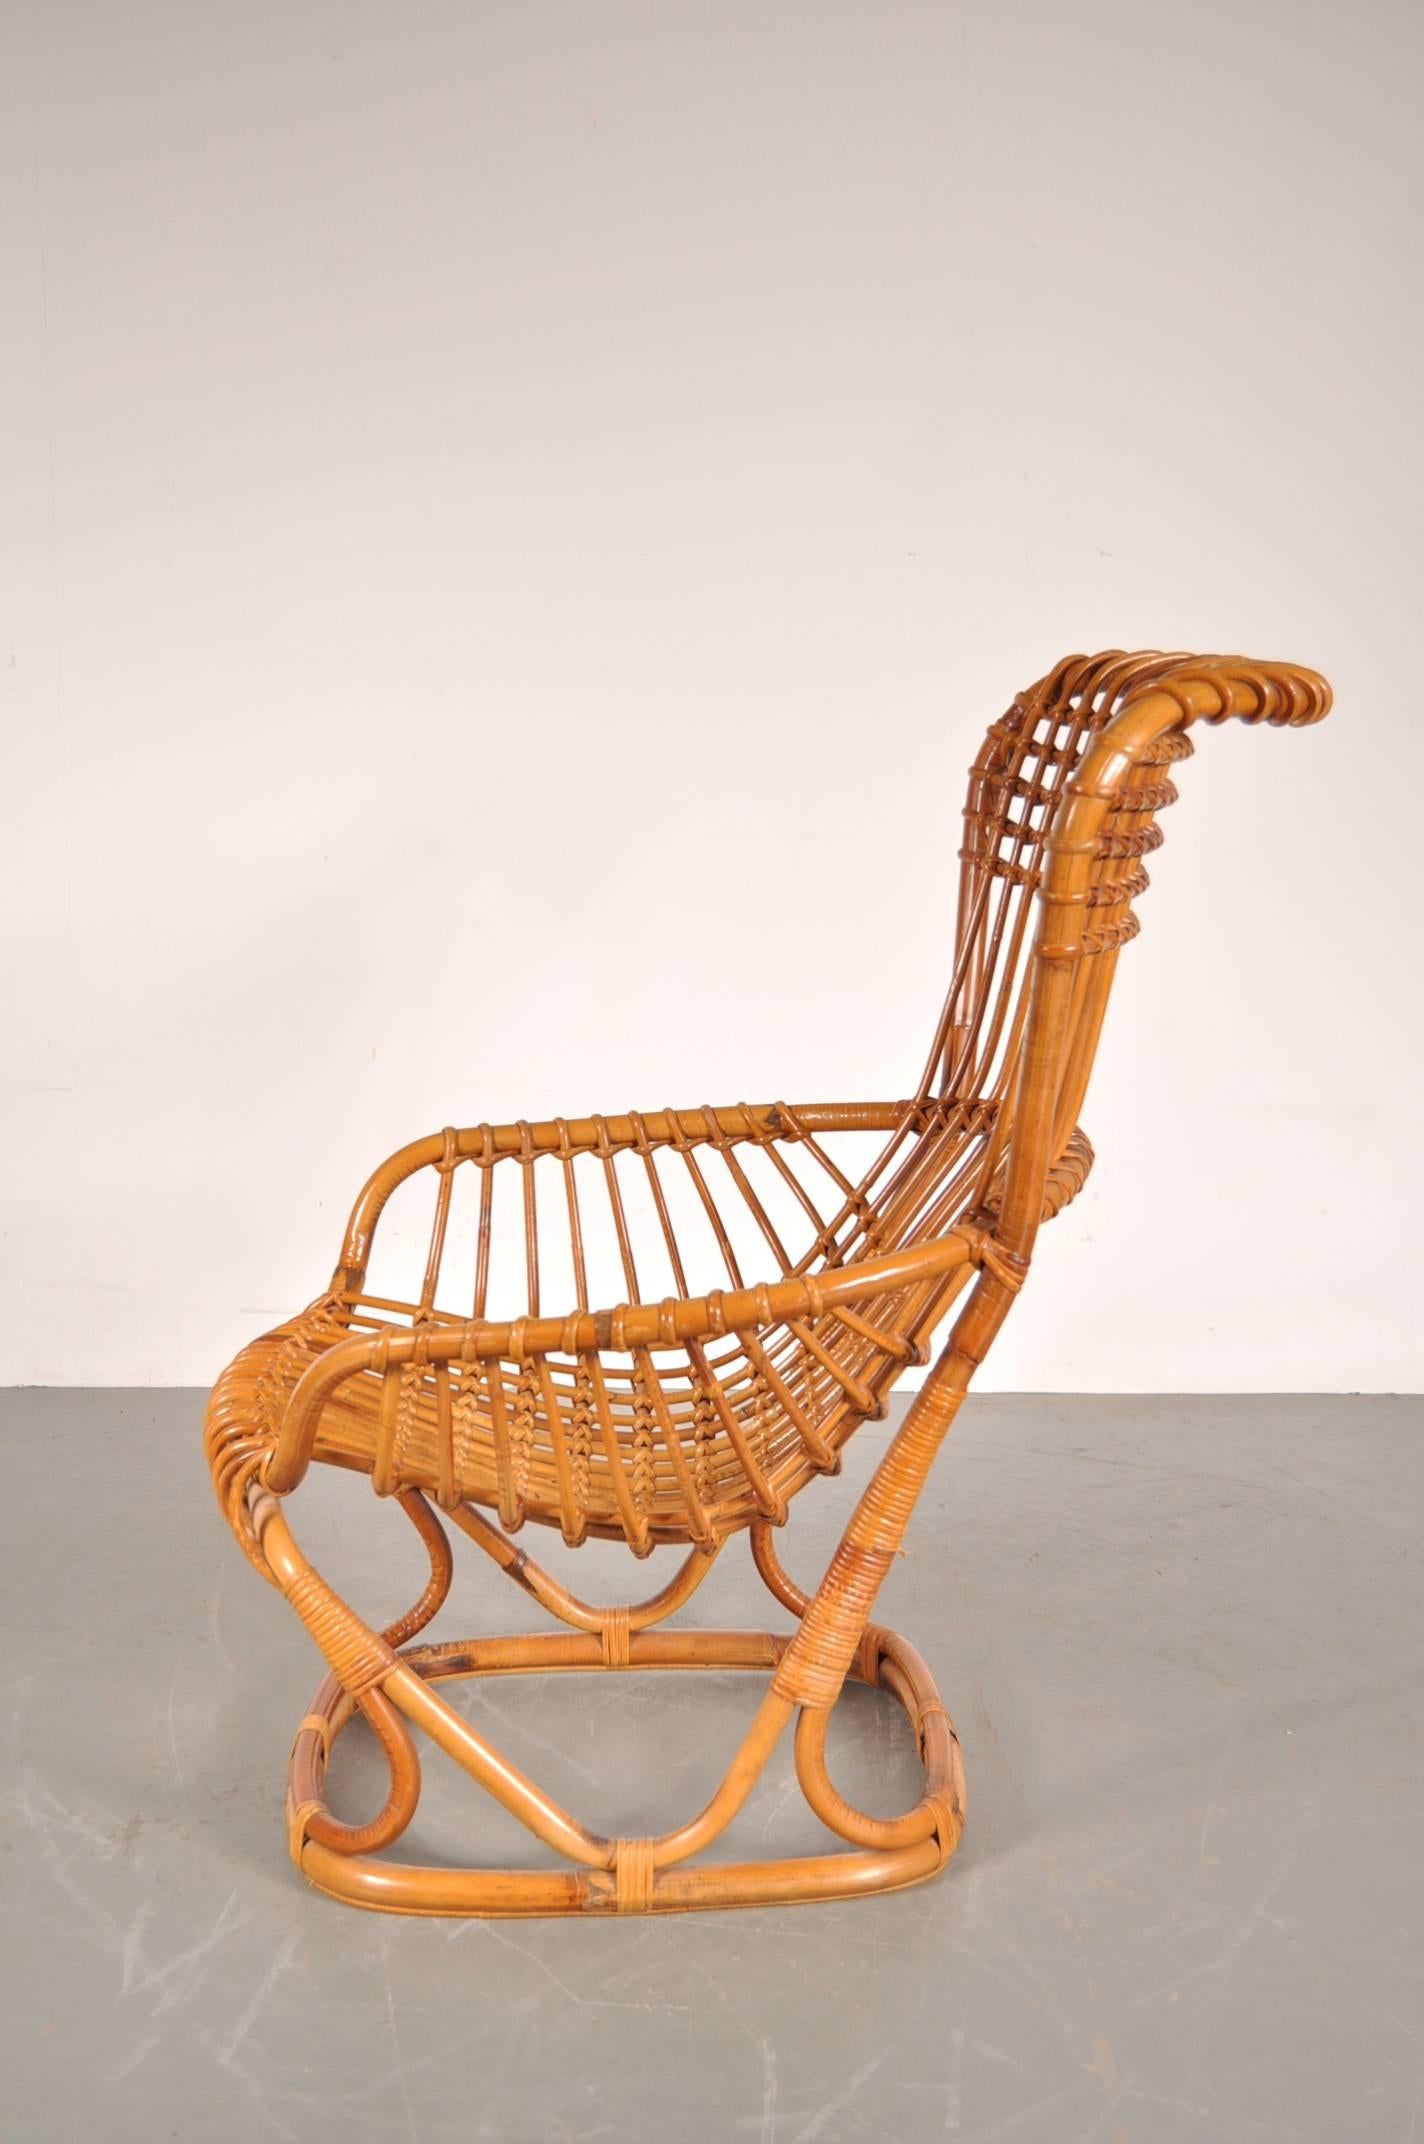 Stunning rattan lounge chair designed by Tito Agnoli, manufactured in Italy in the 1960's.

This eye-catching piece is completely made of the highest quality rattan, beautifuly crafted together with an amazing eye for detail. It has a high back